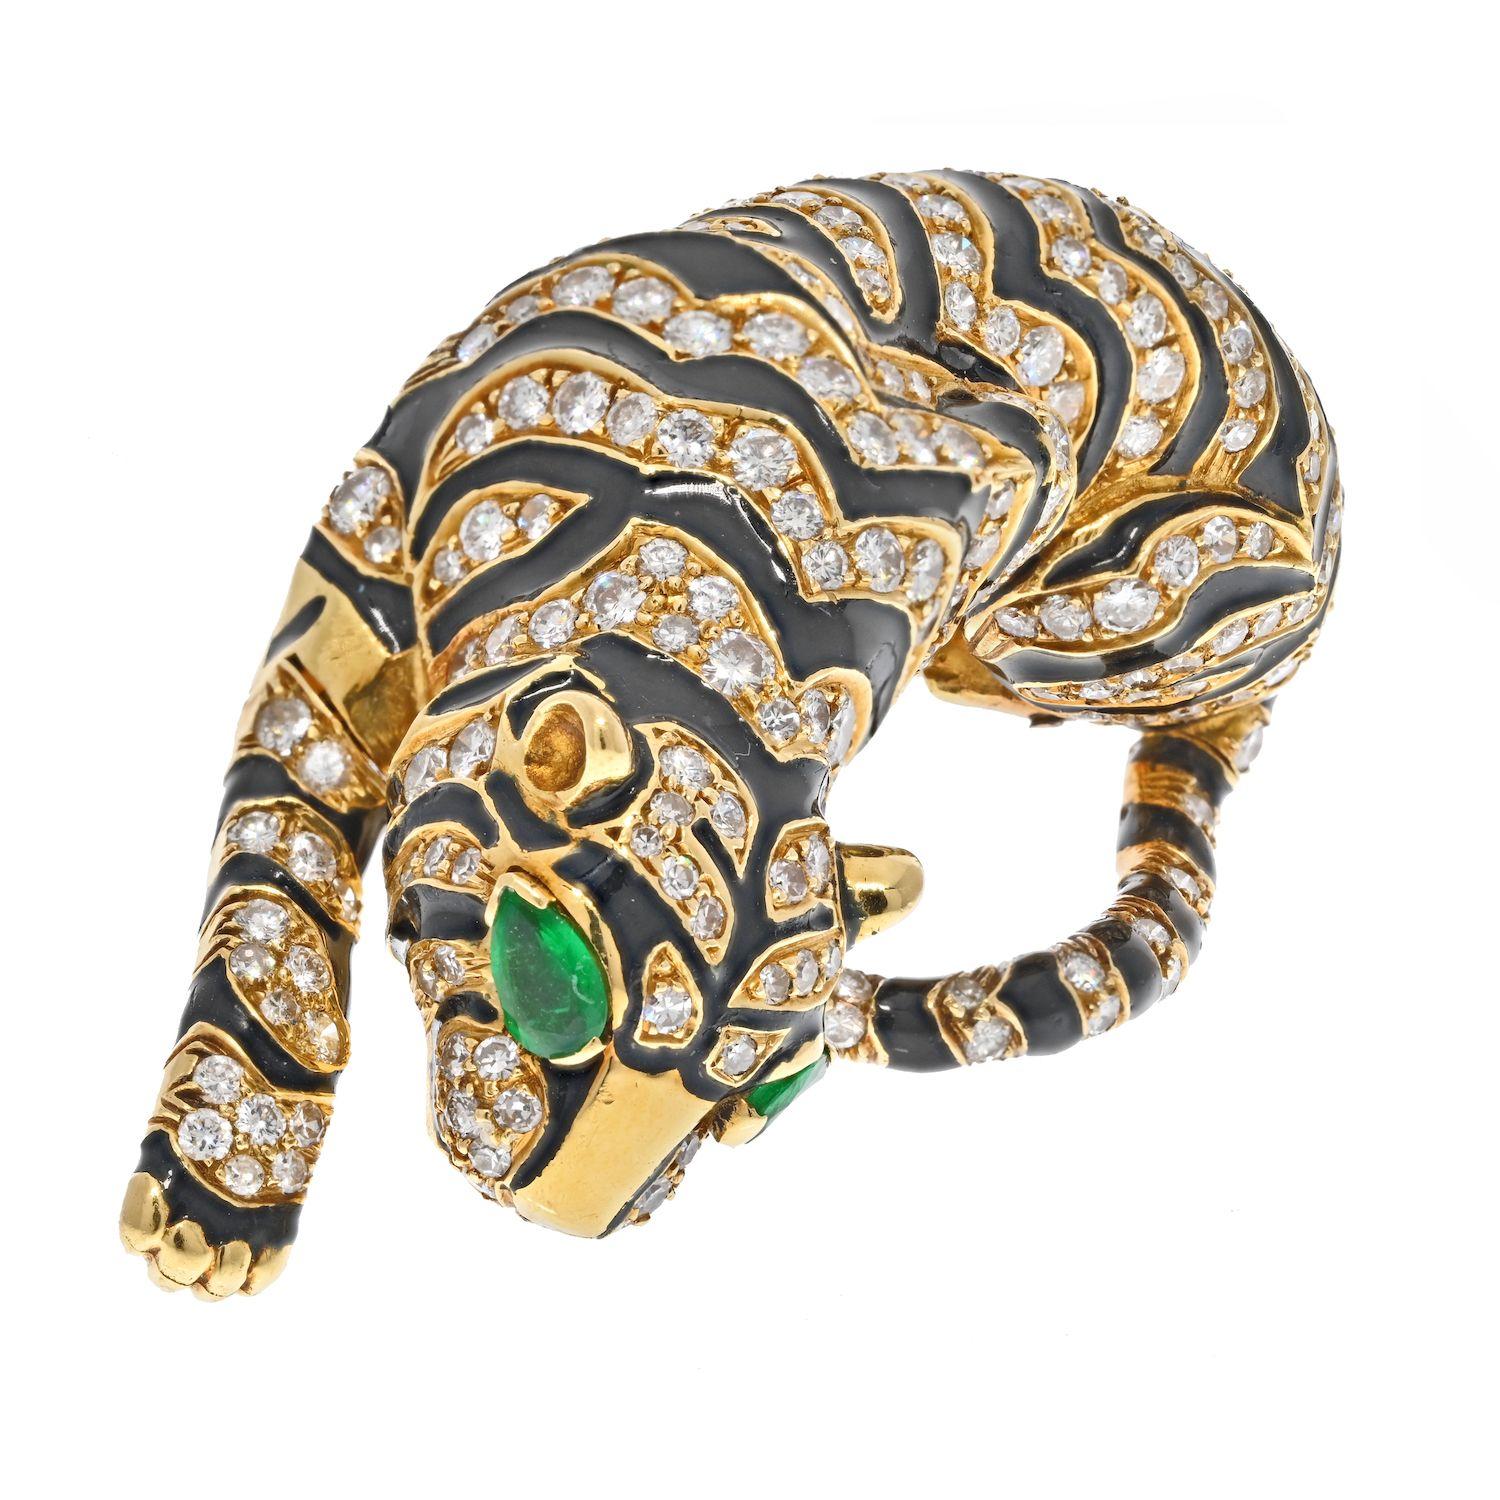 Absolutely gorgeous you will love this tiger brooch by David Webb. From David Webb 